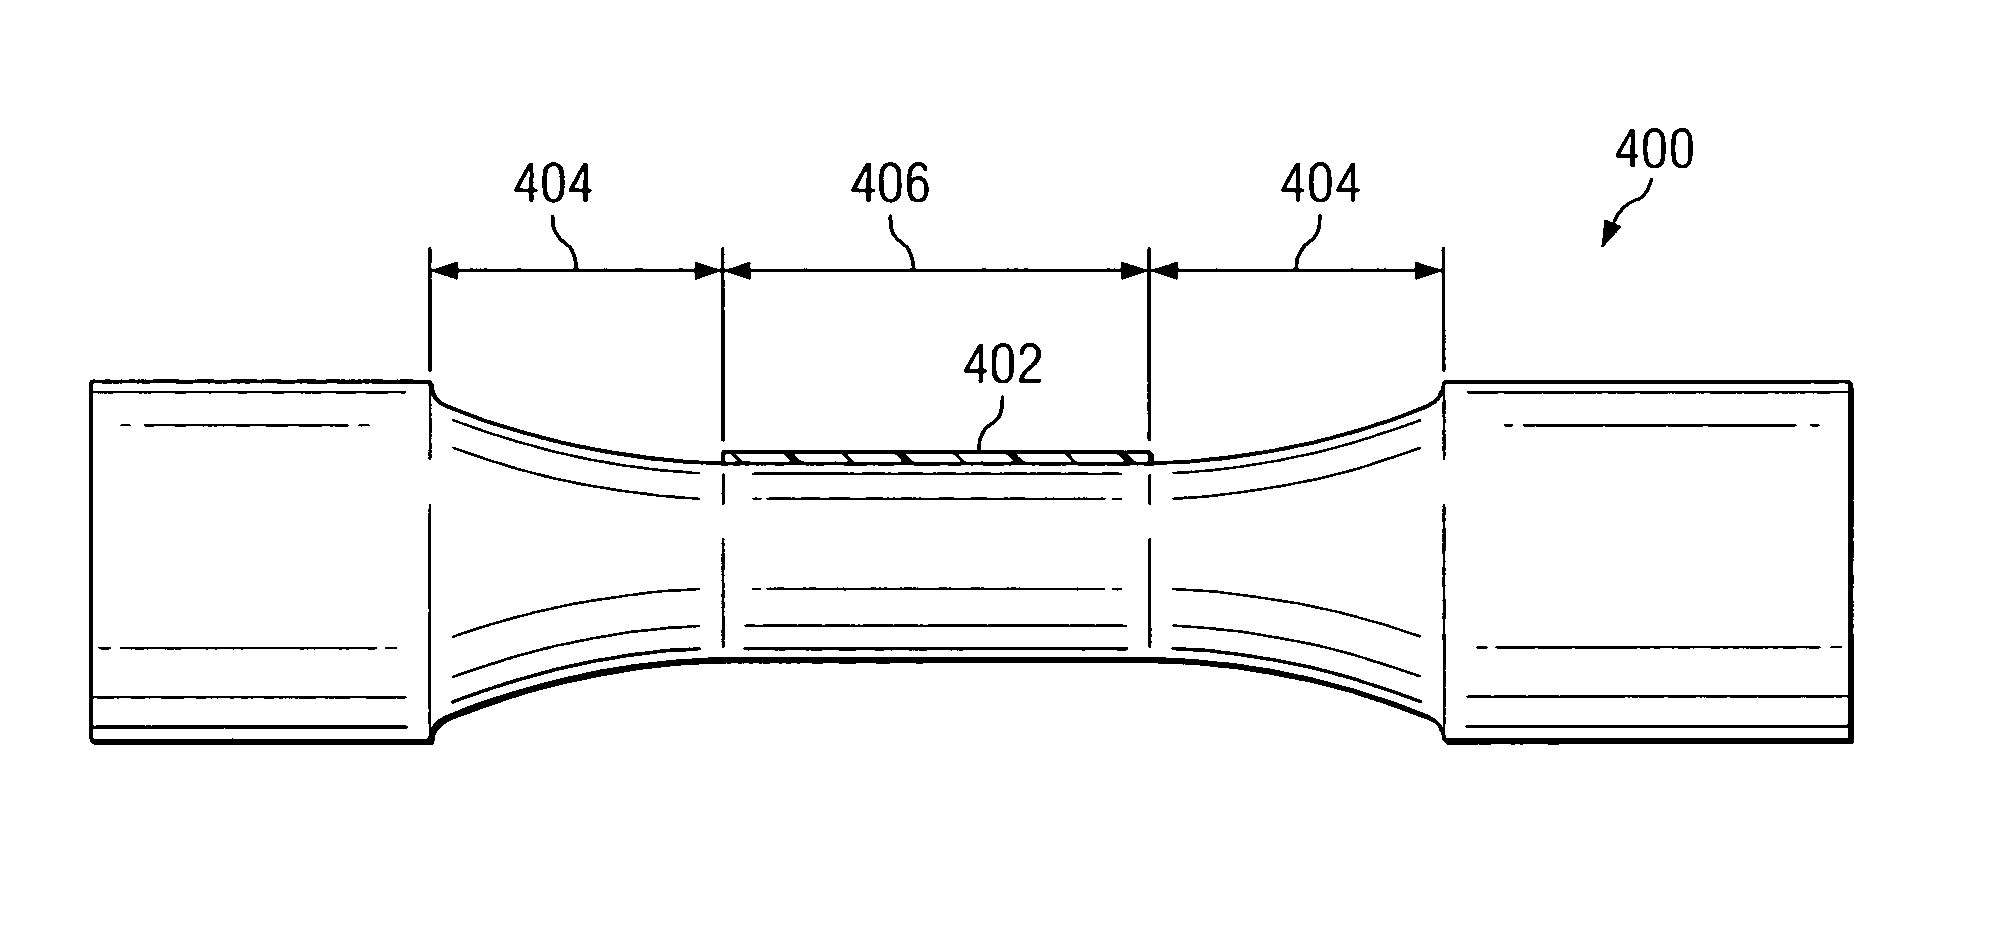 Variable curvature in tape guide rollers